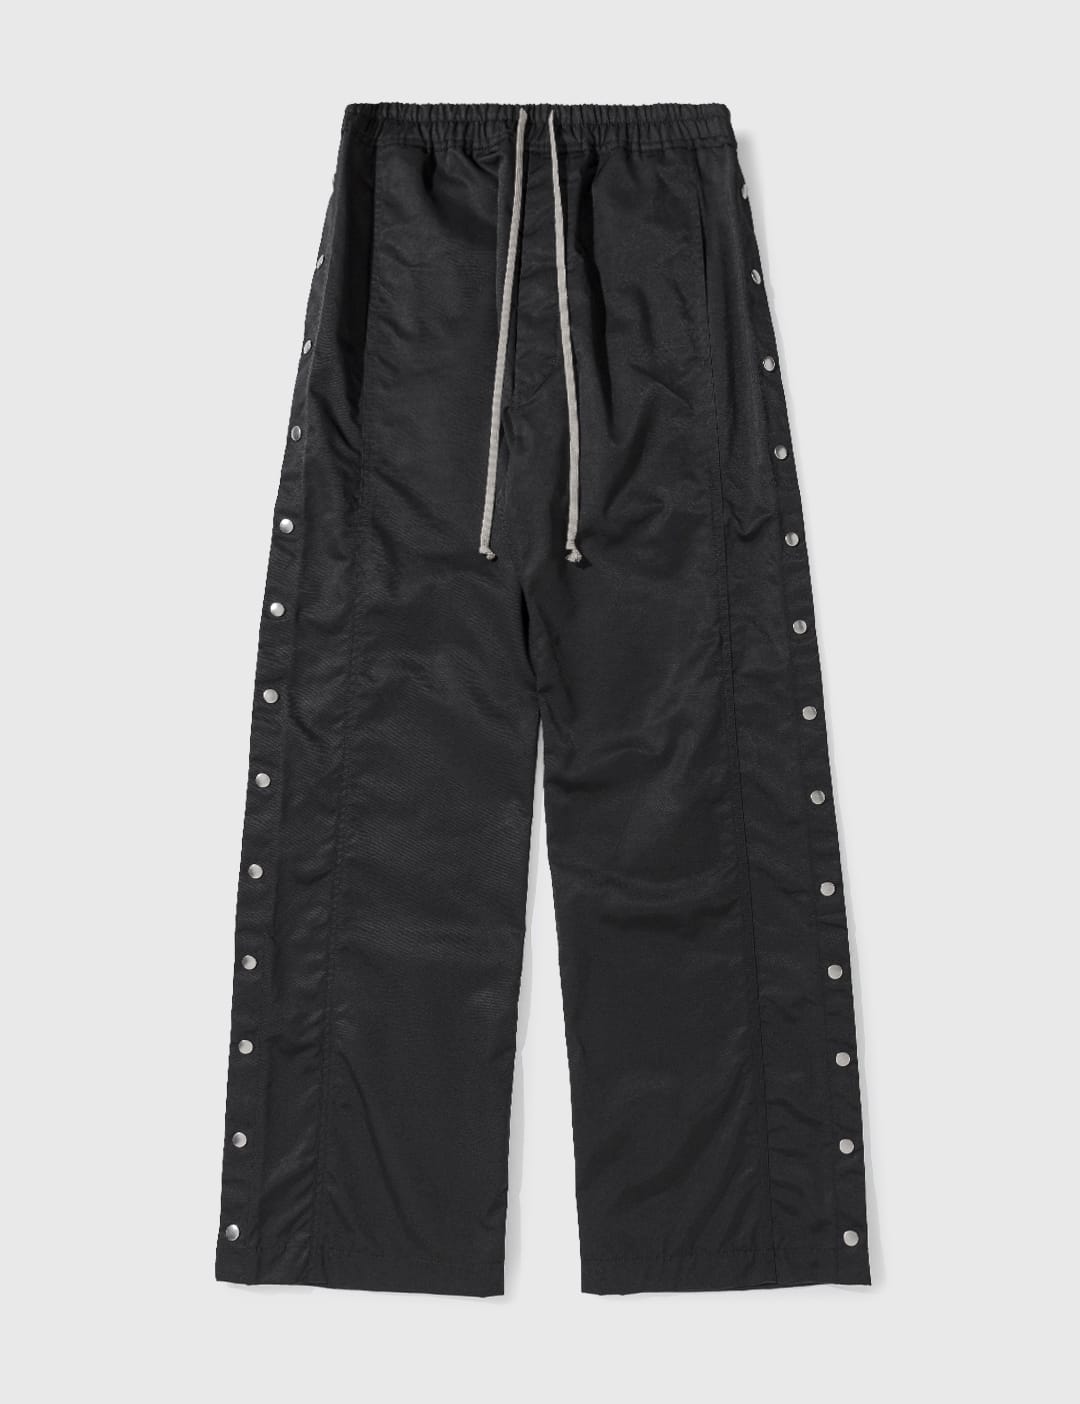 Rick Owens Drkshdw - Pusher Pants | HBX - Globally Curated Fashion